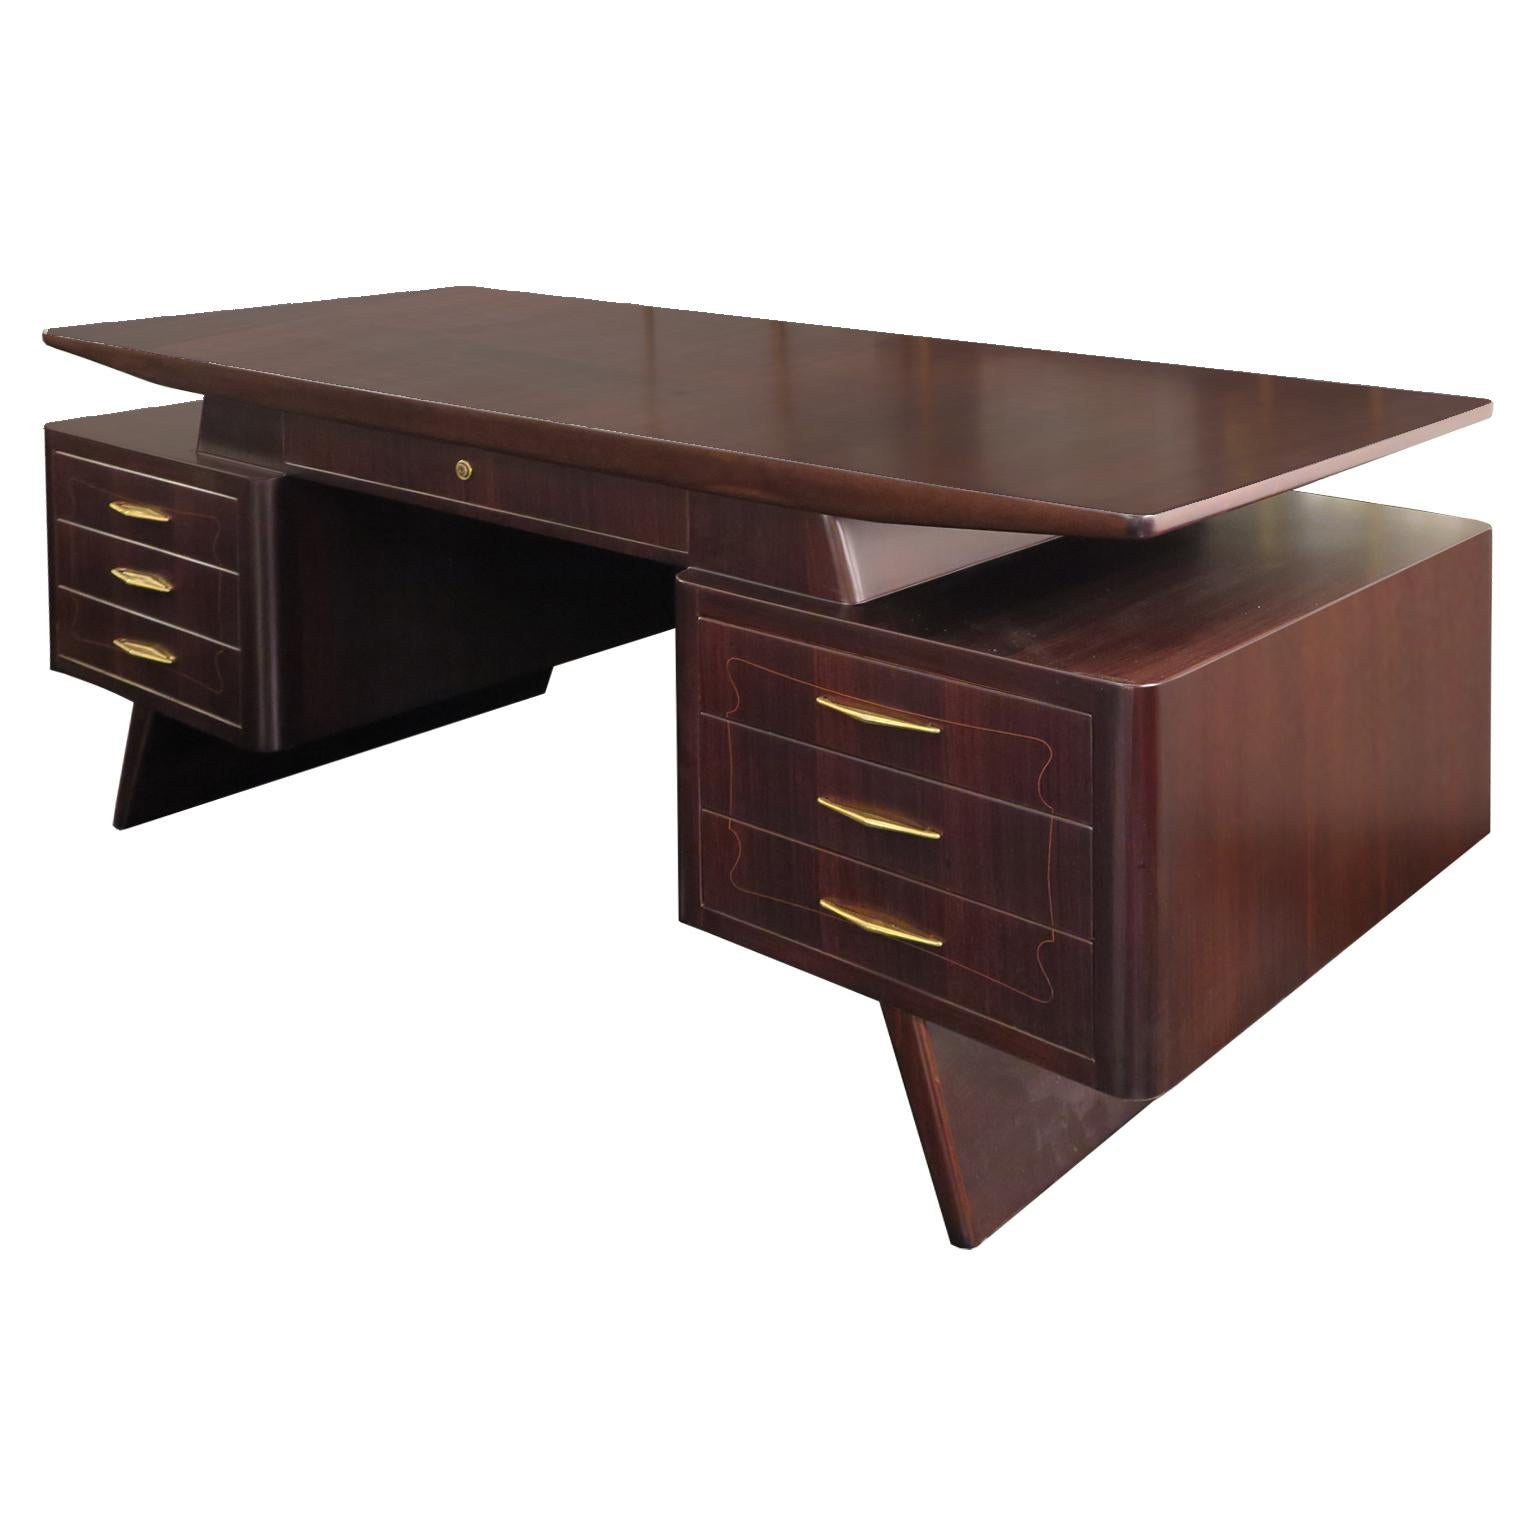 This stunning Italian Mid-Century Desk is crafted in Indian Rosewood with a satin finish. The piece features a floating top, with a center drawer and six side drawers.  A delicate fruitwood rectangular inlay is seen on the top in addition to the